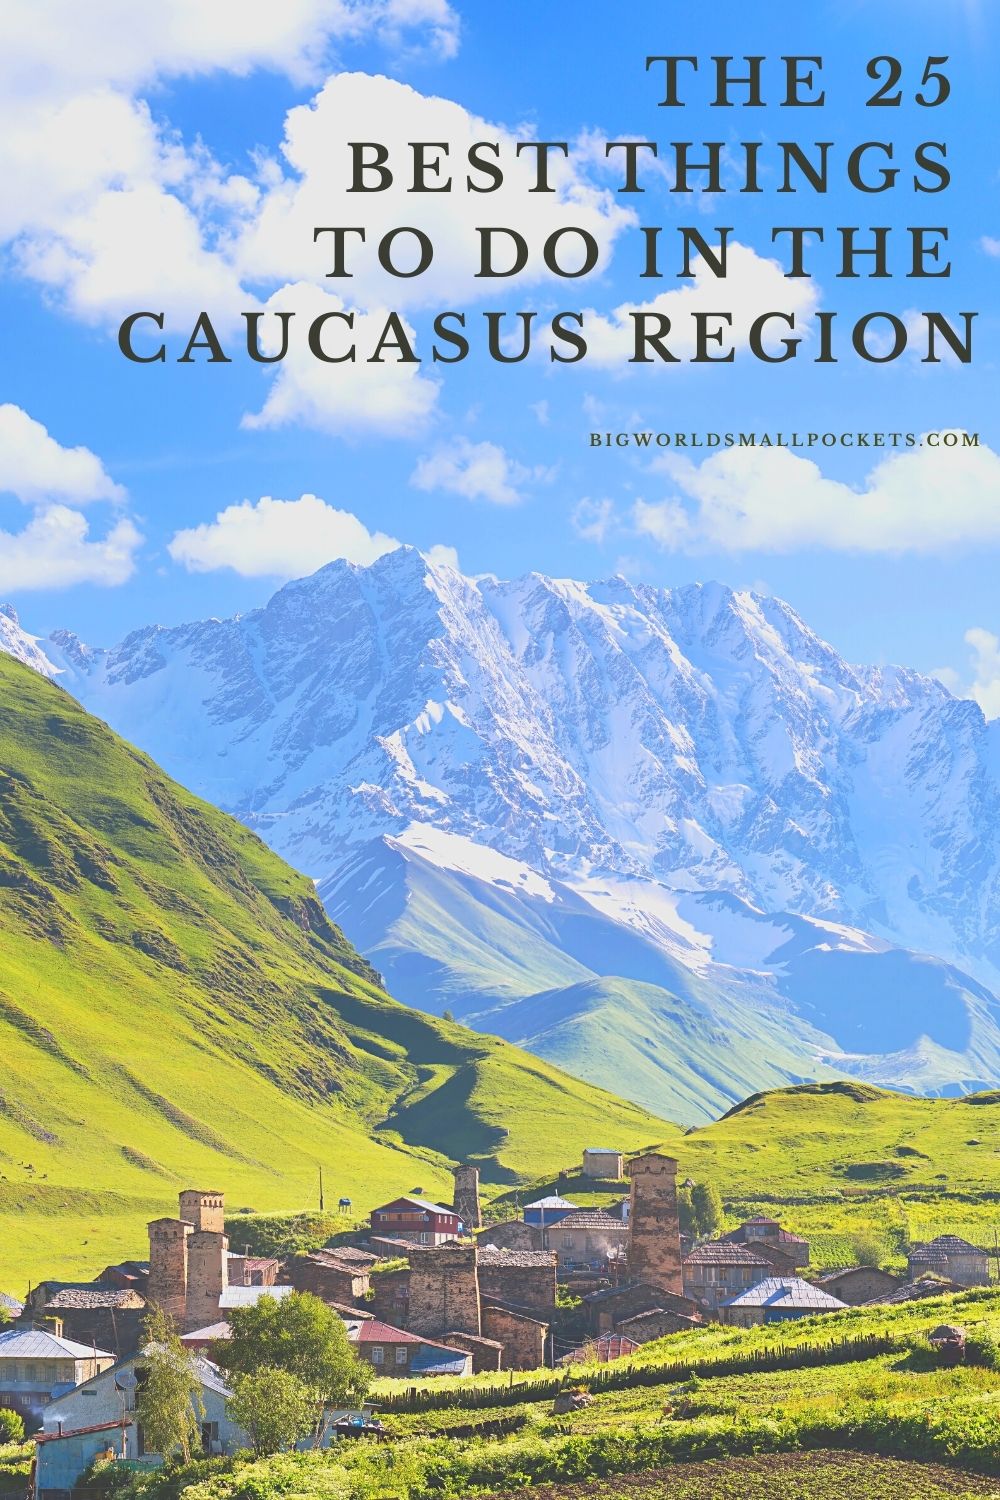 25 Best Things To Do in the Caucasus Region